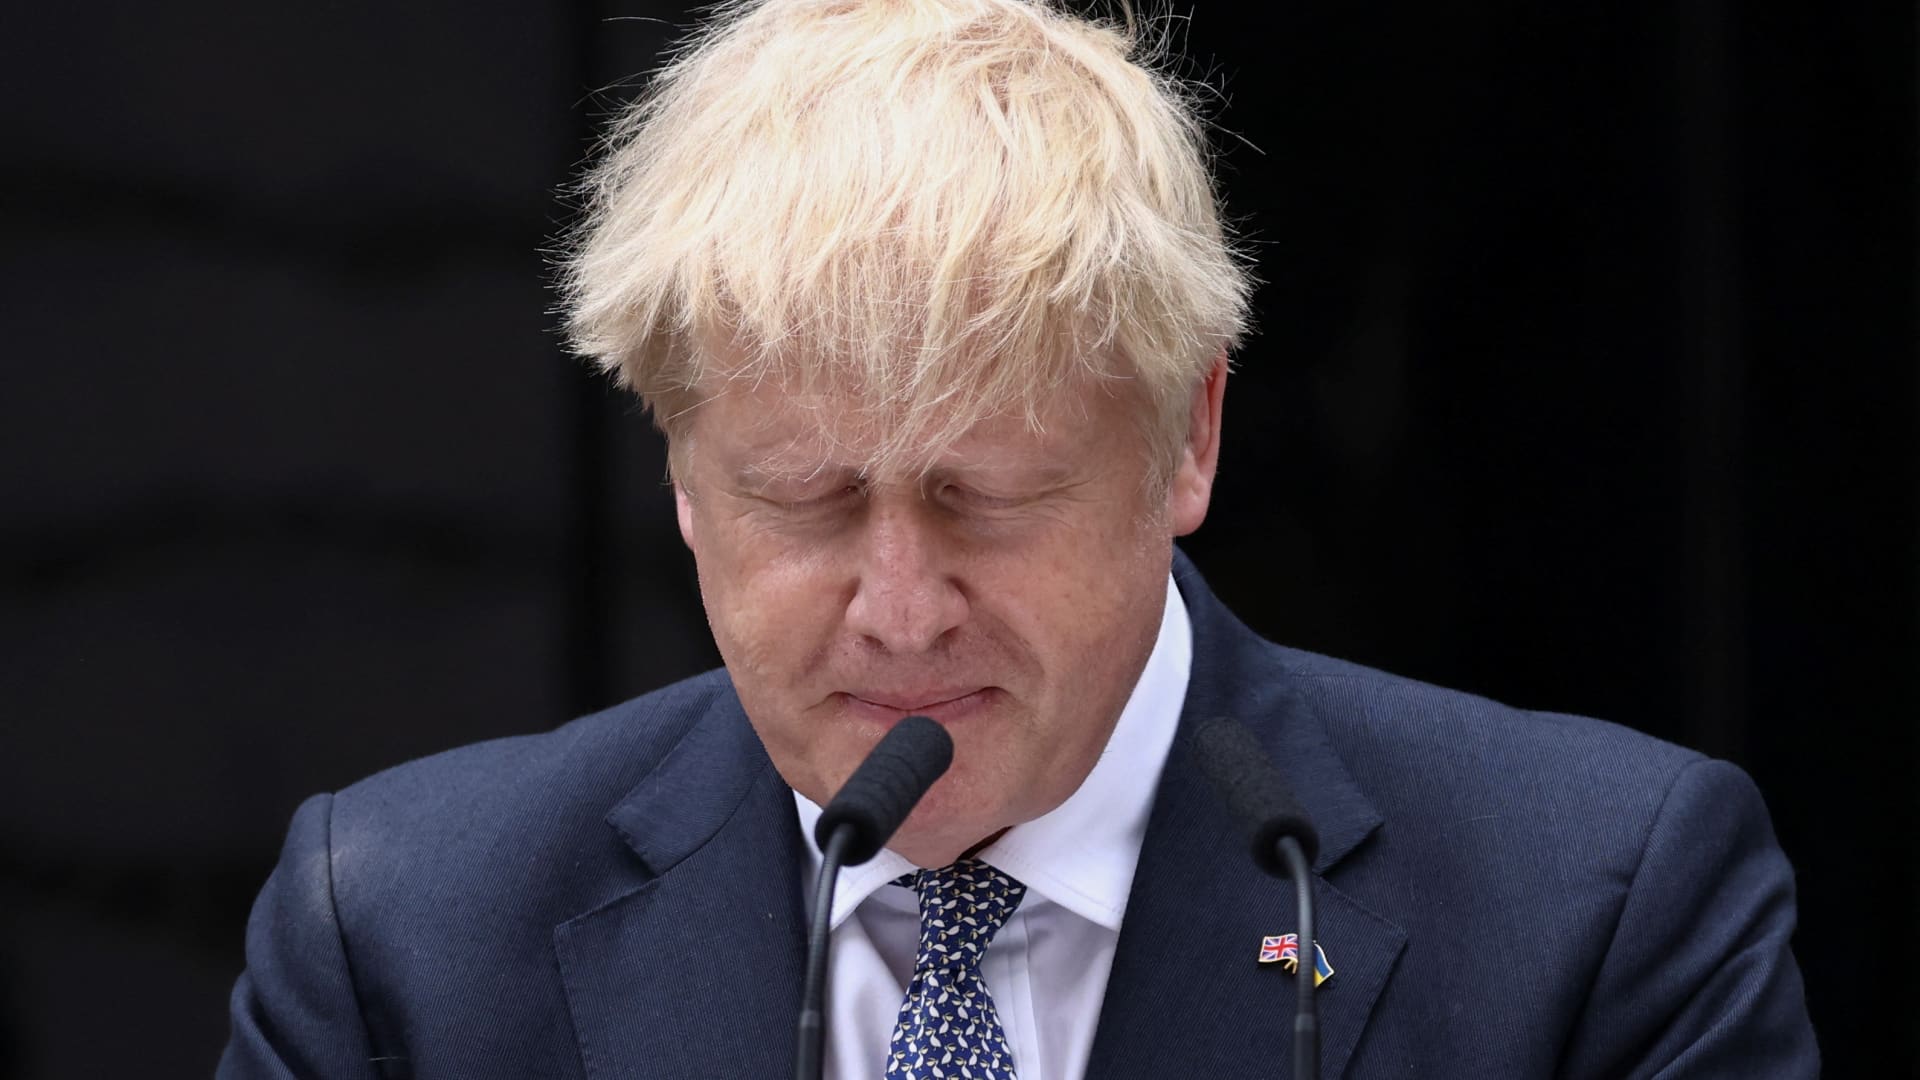 Boris Johnson is going, and strategists are making a wager on huge changes to the UK economy